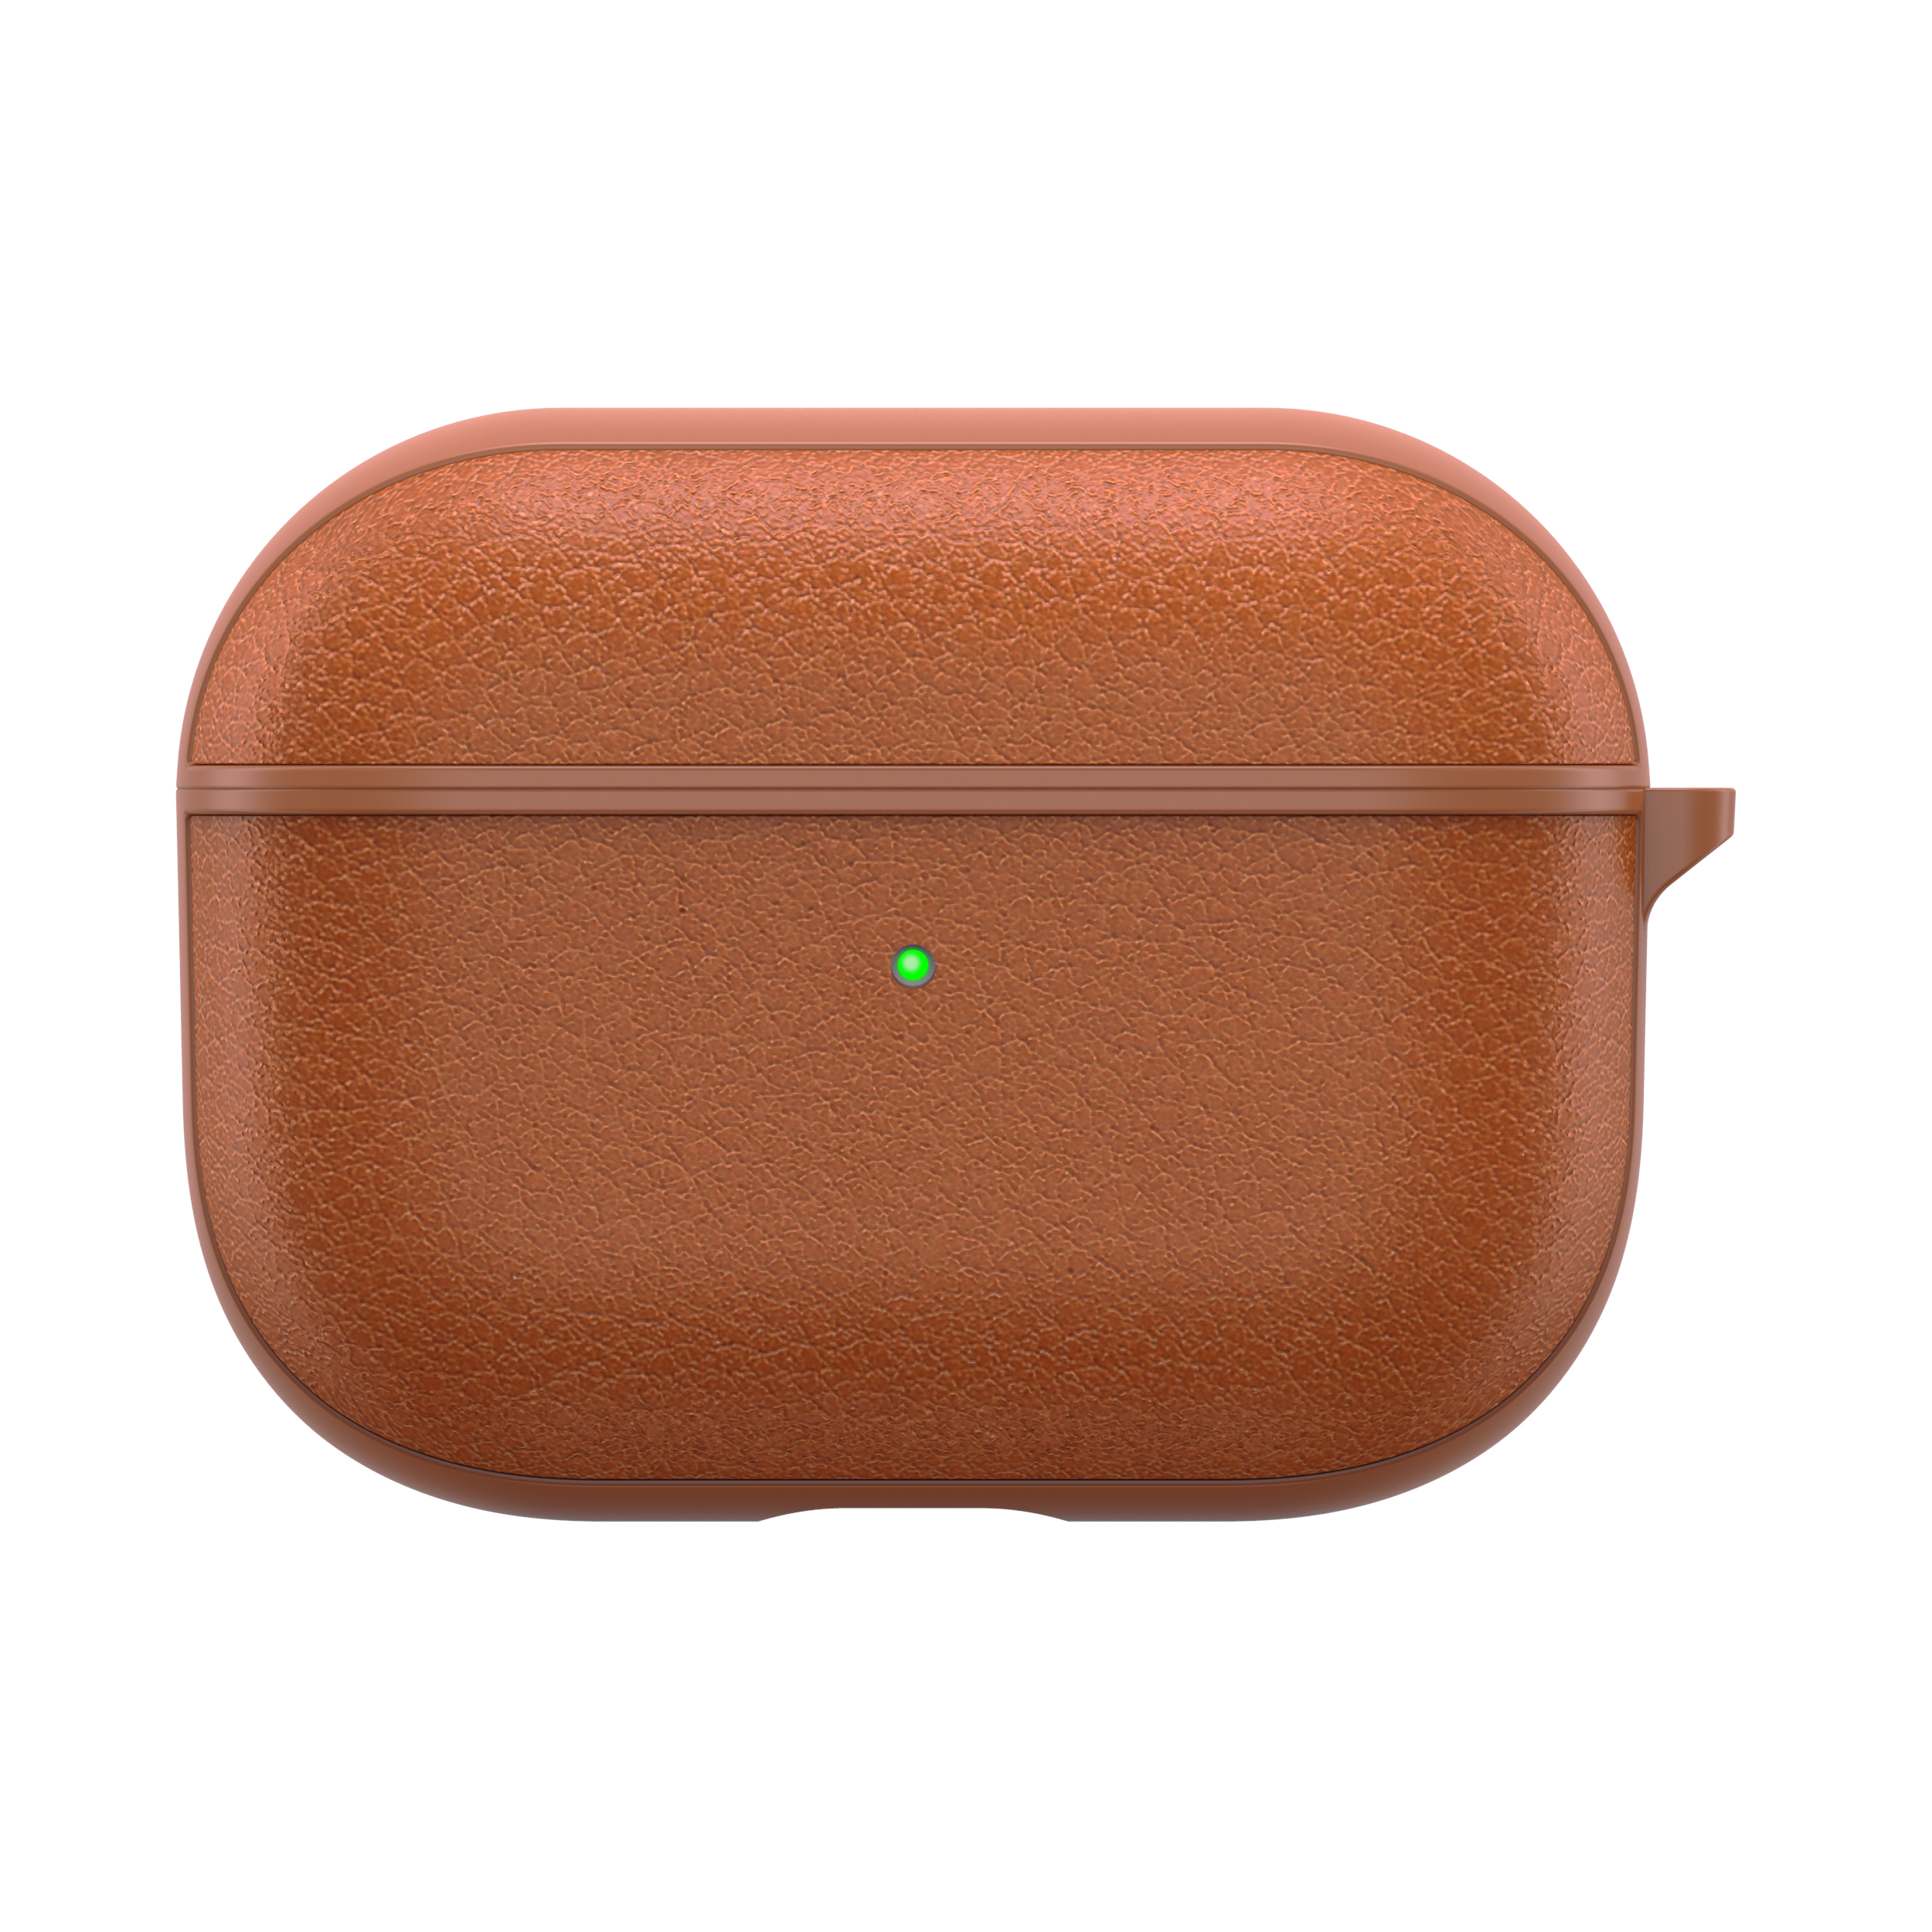 WiWU Calfskin Genuine Leather Case Portable Carry TPU+Calfskin 360 Degree Full Protection for Airpods Pro